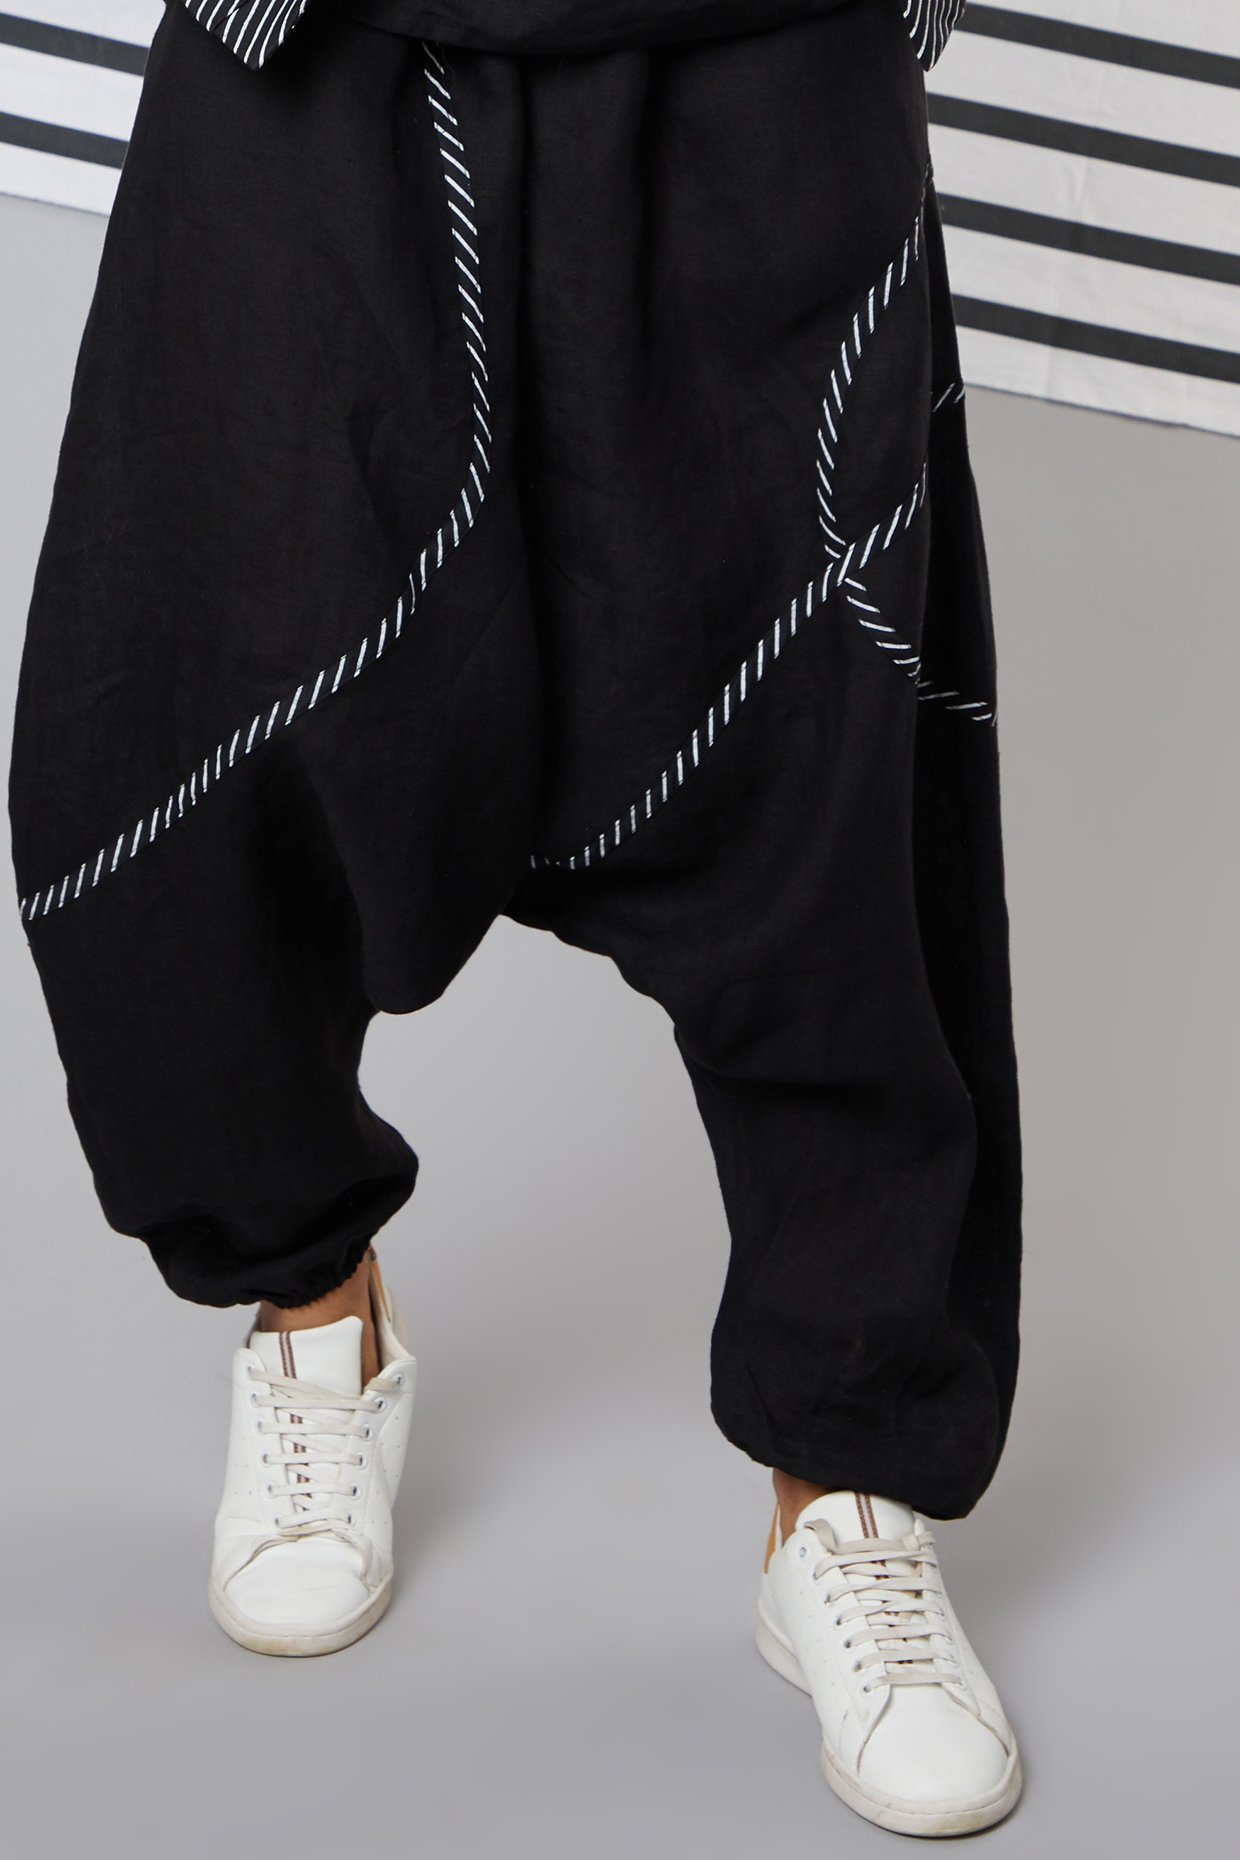 Buy Black Dhoti Pants With Metal Hanging Trim Online - Shop for W